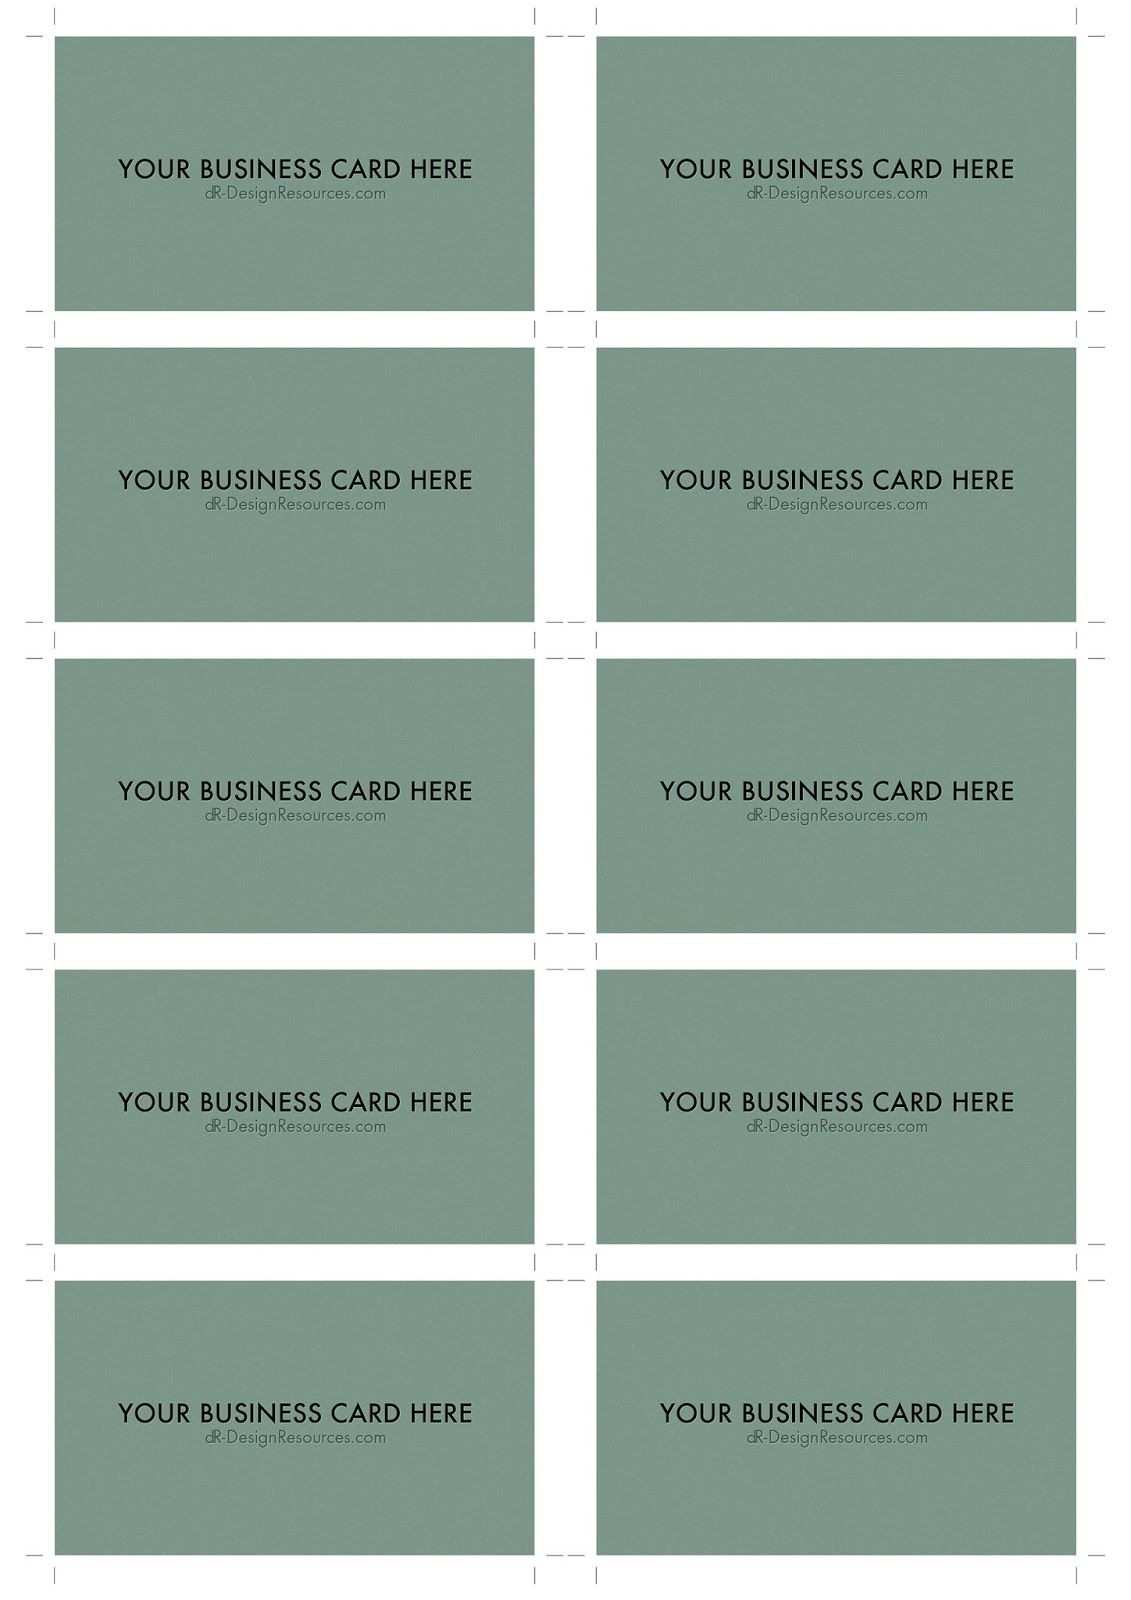 67 Format Blank Business Card Template Download Photoshop Maker with Blank Business Card Template Download Photoshop